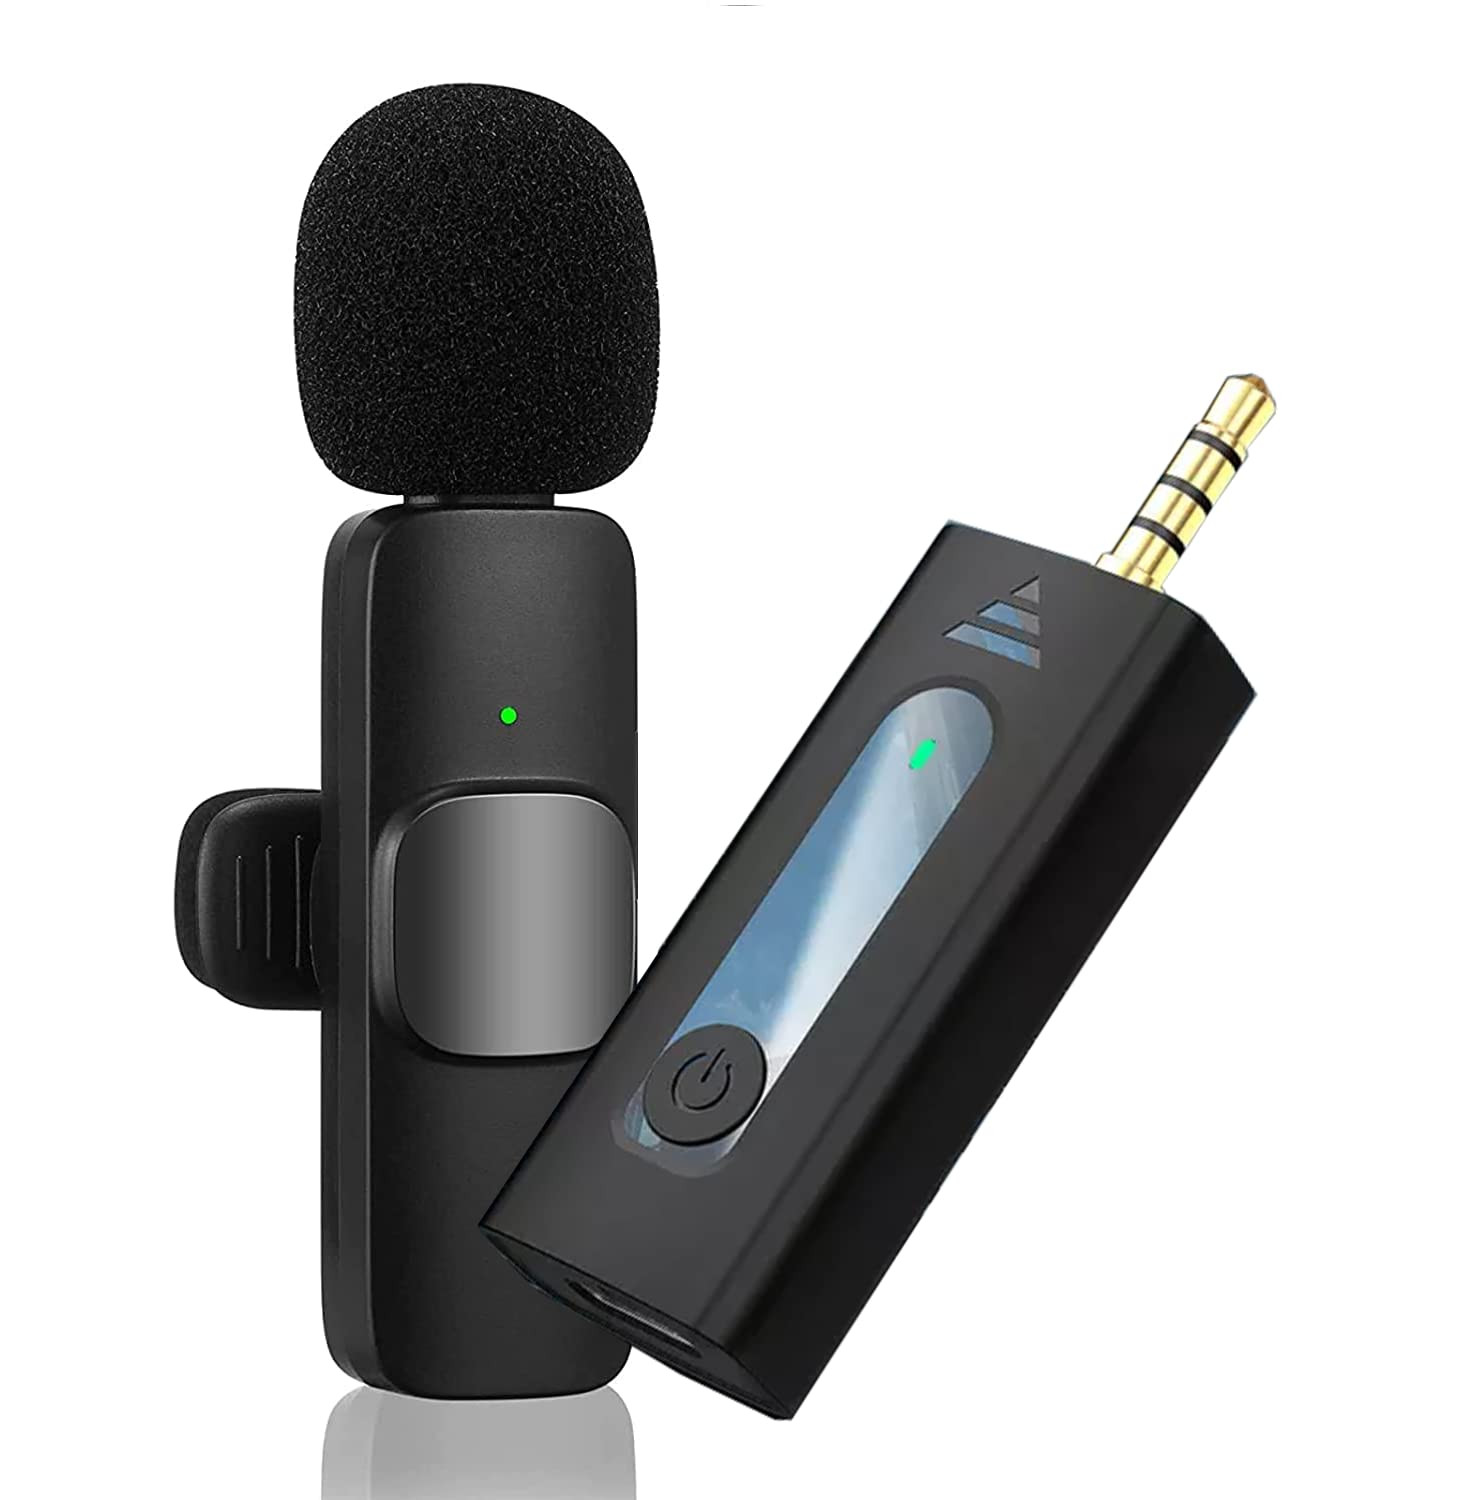 K-35 Wireless Collar Microphone Lap Product Code: 3649